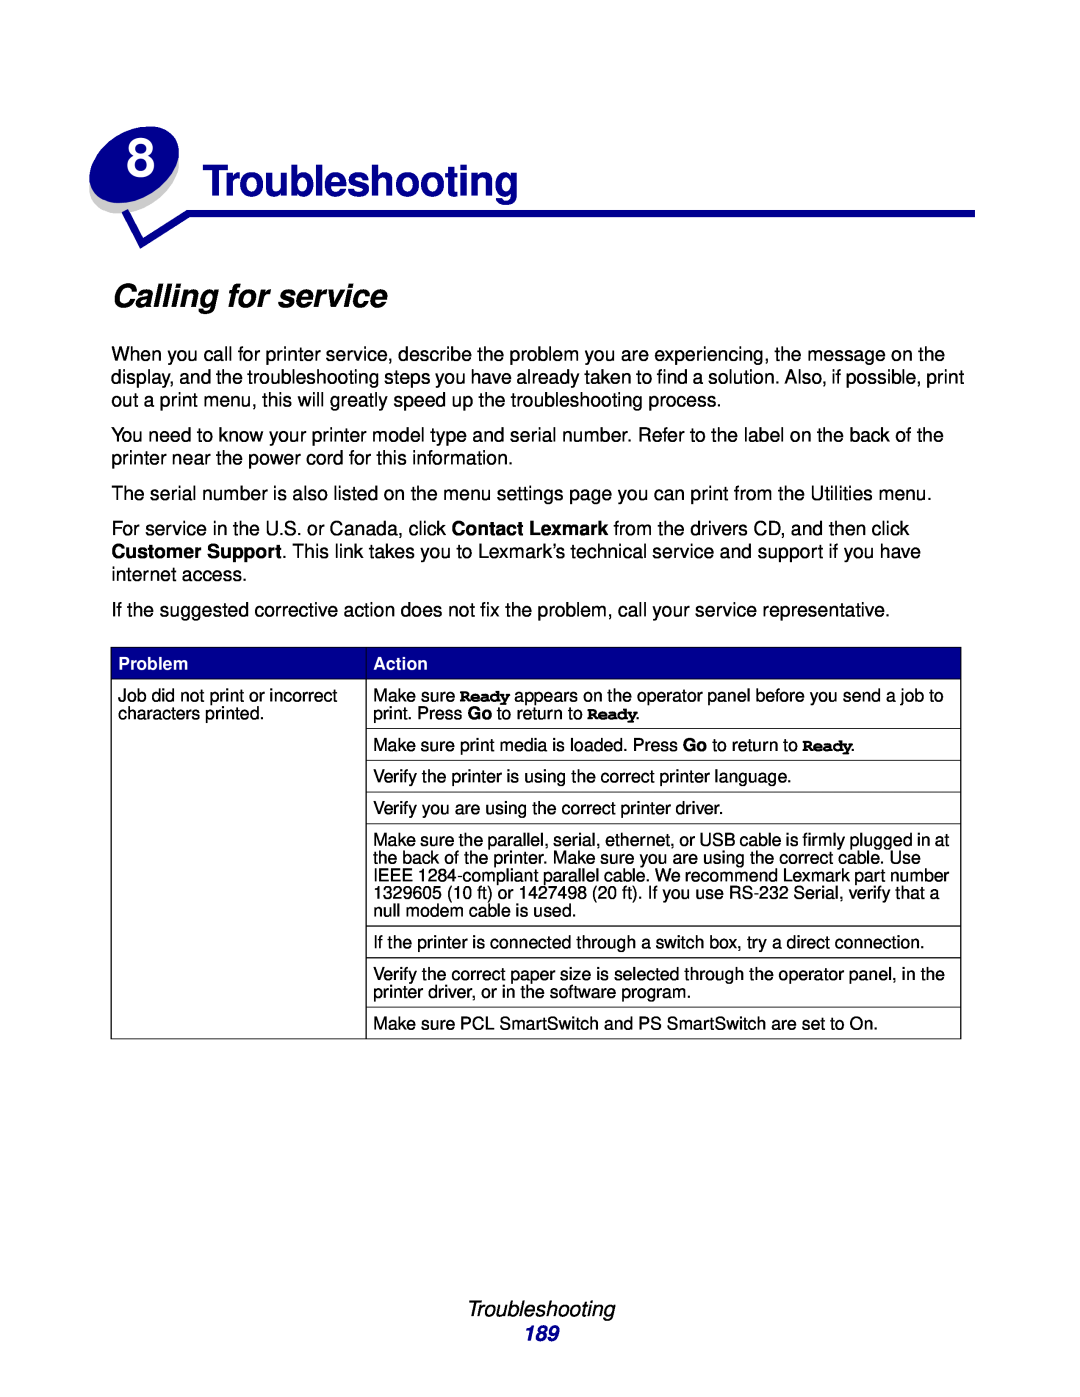 Lexmark 912 manual Troubleshooting, Calling for service 